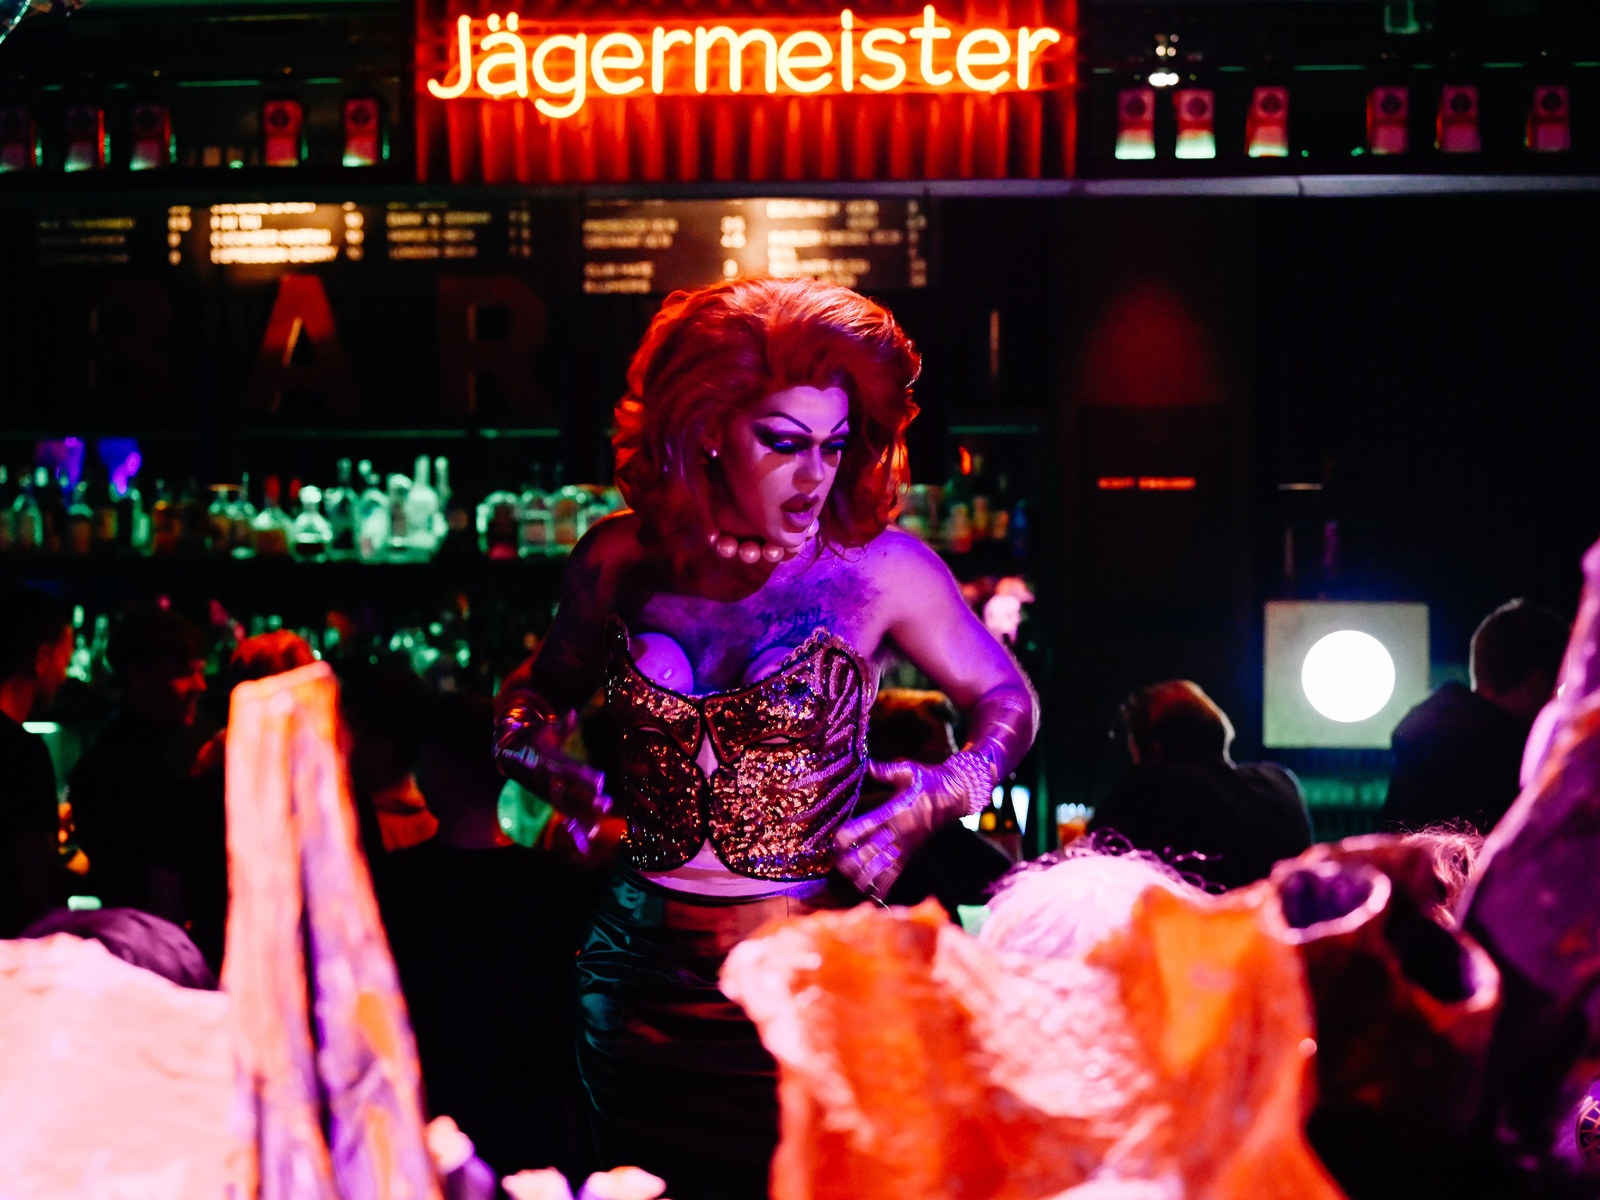 A picture of Pansy posing in front of a Jägermeister bar. Photograph by Camille Blake